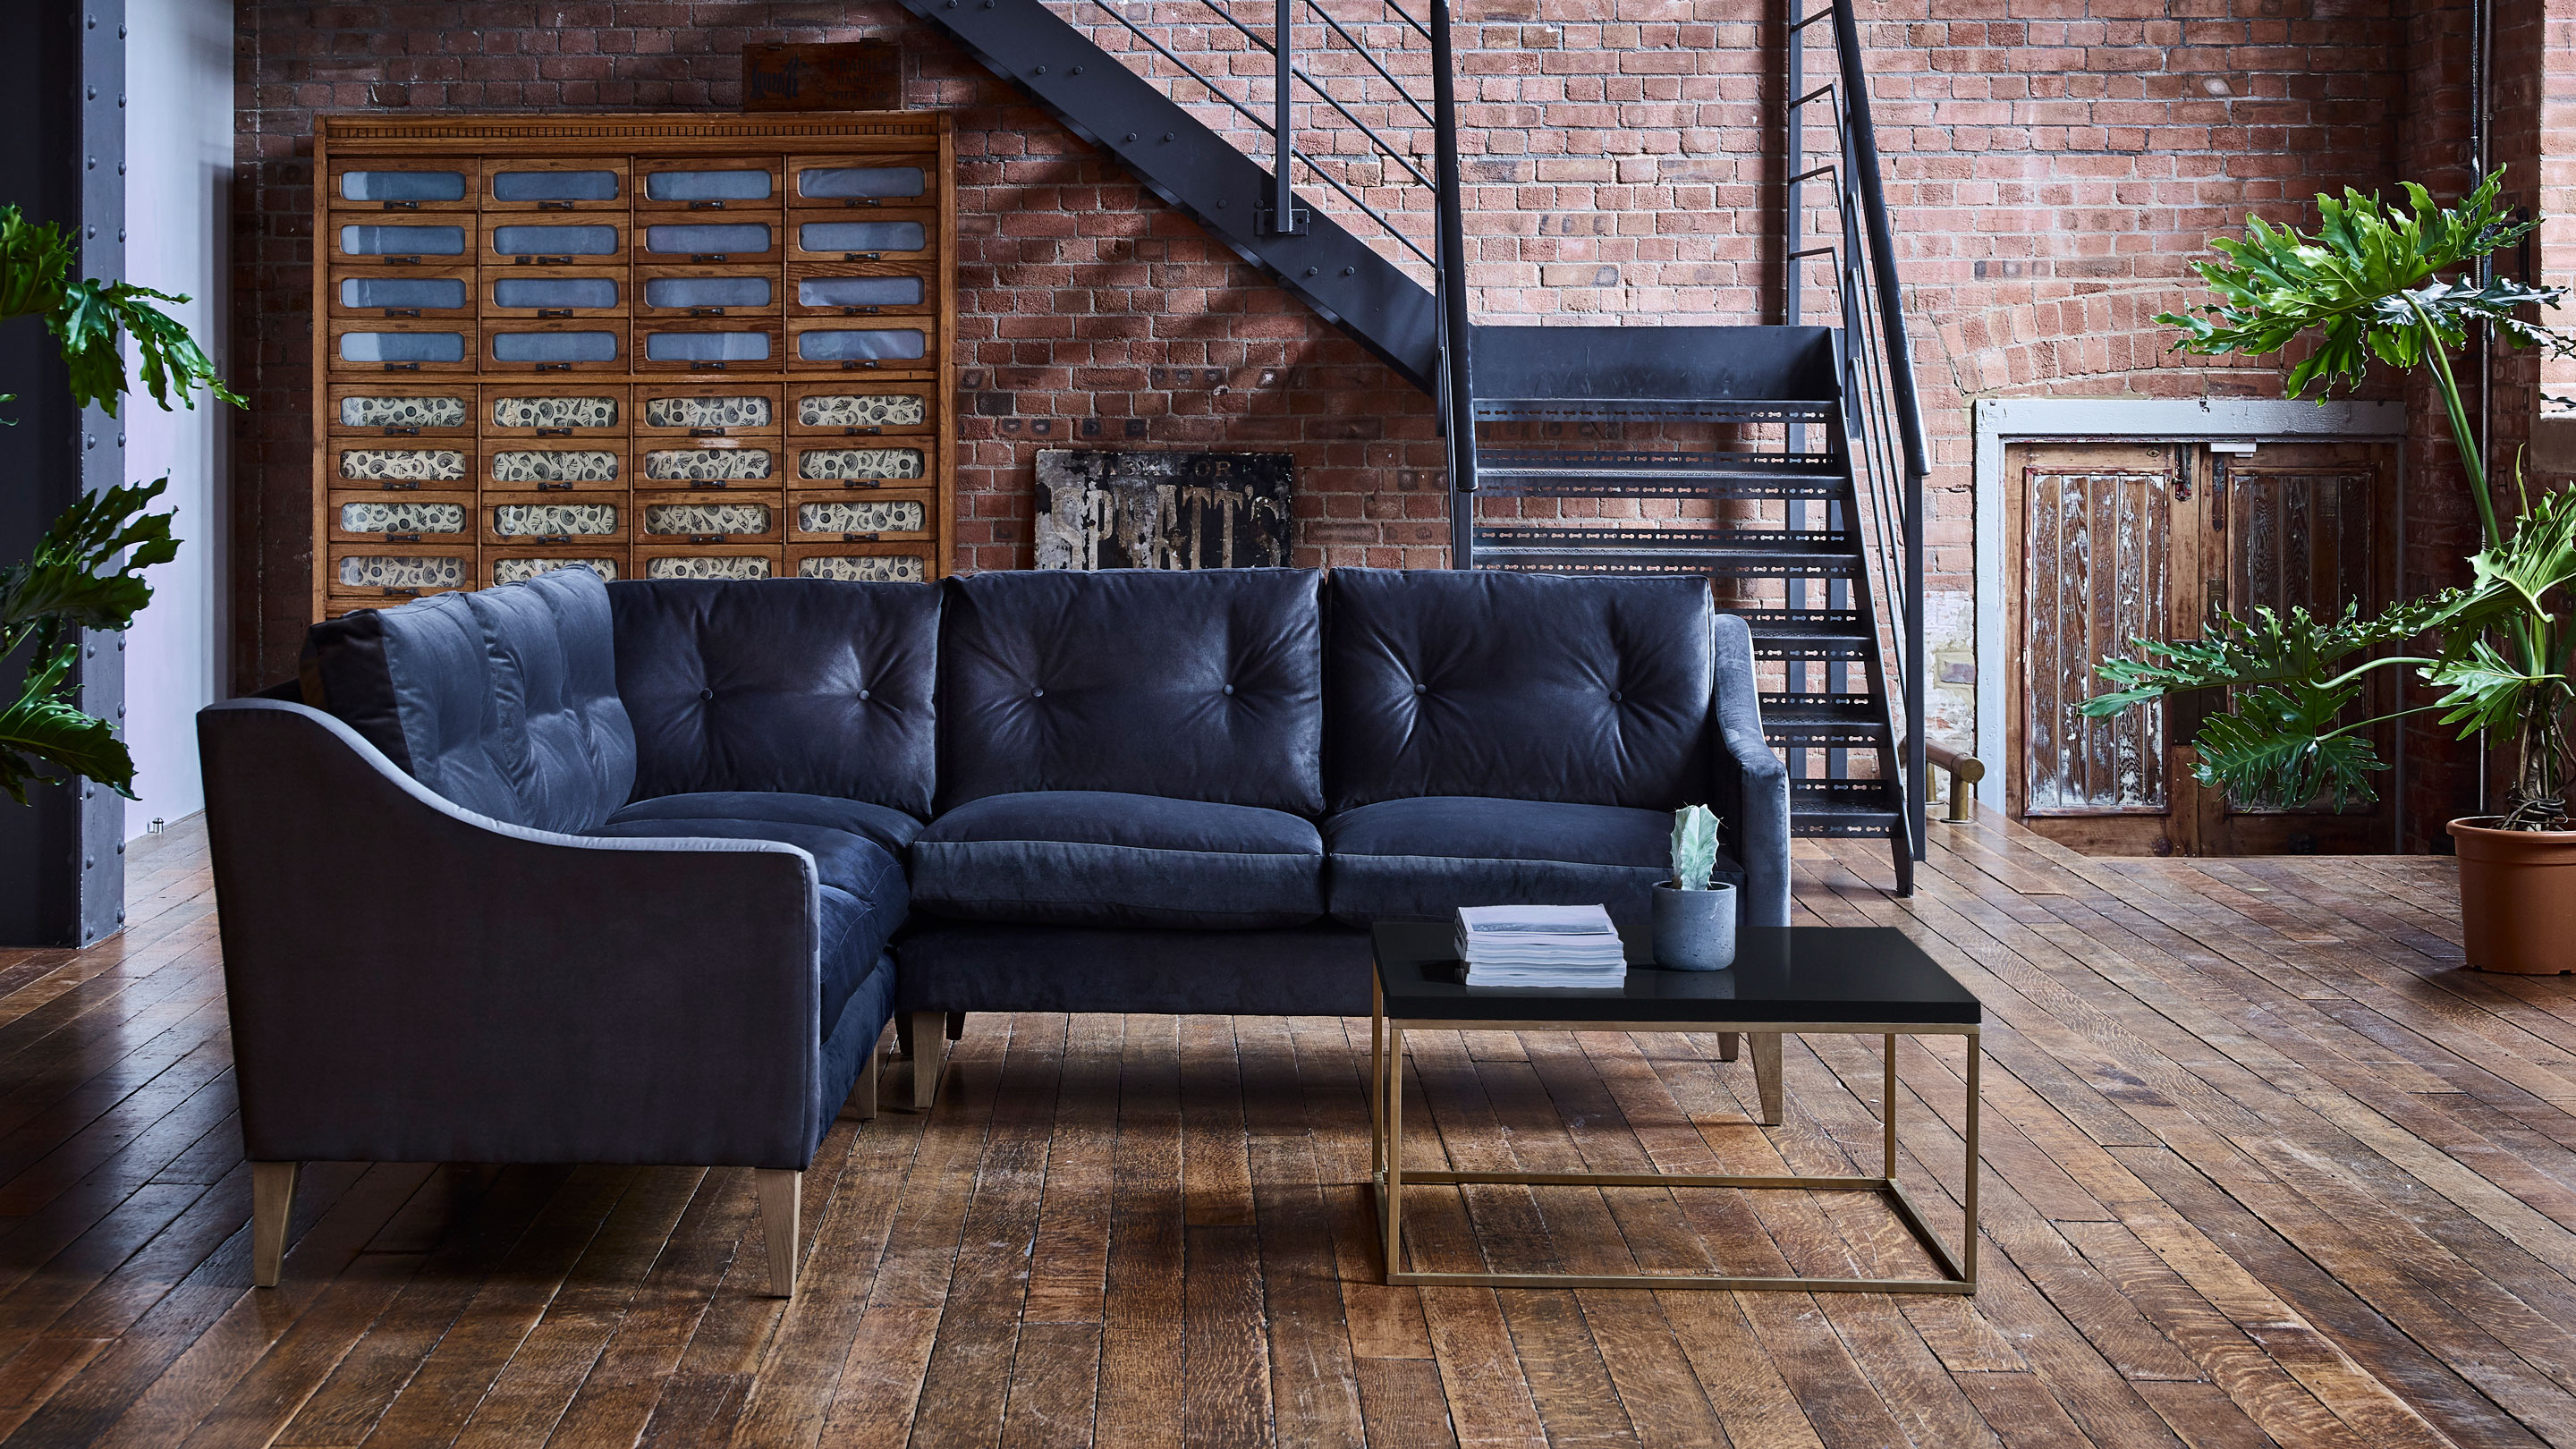 Industrial style, Getting the look, Arlo and Jacob inspiration, Stylish interiors, 2880x1620 HD Desktop